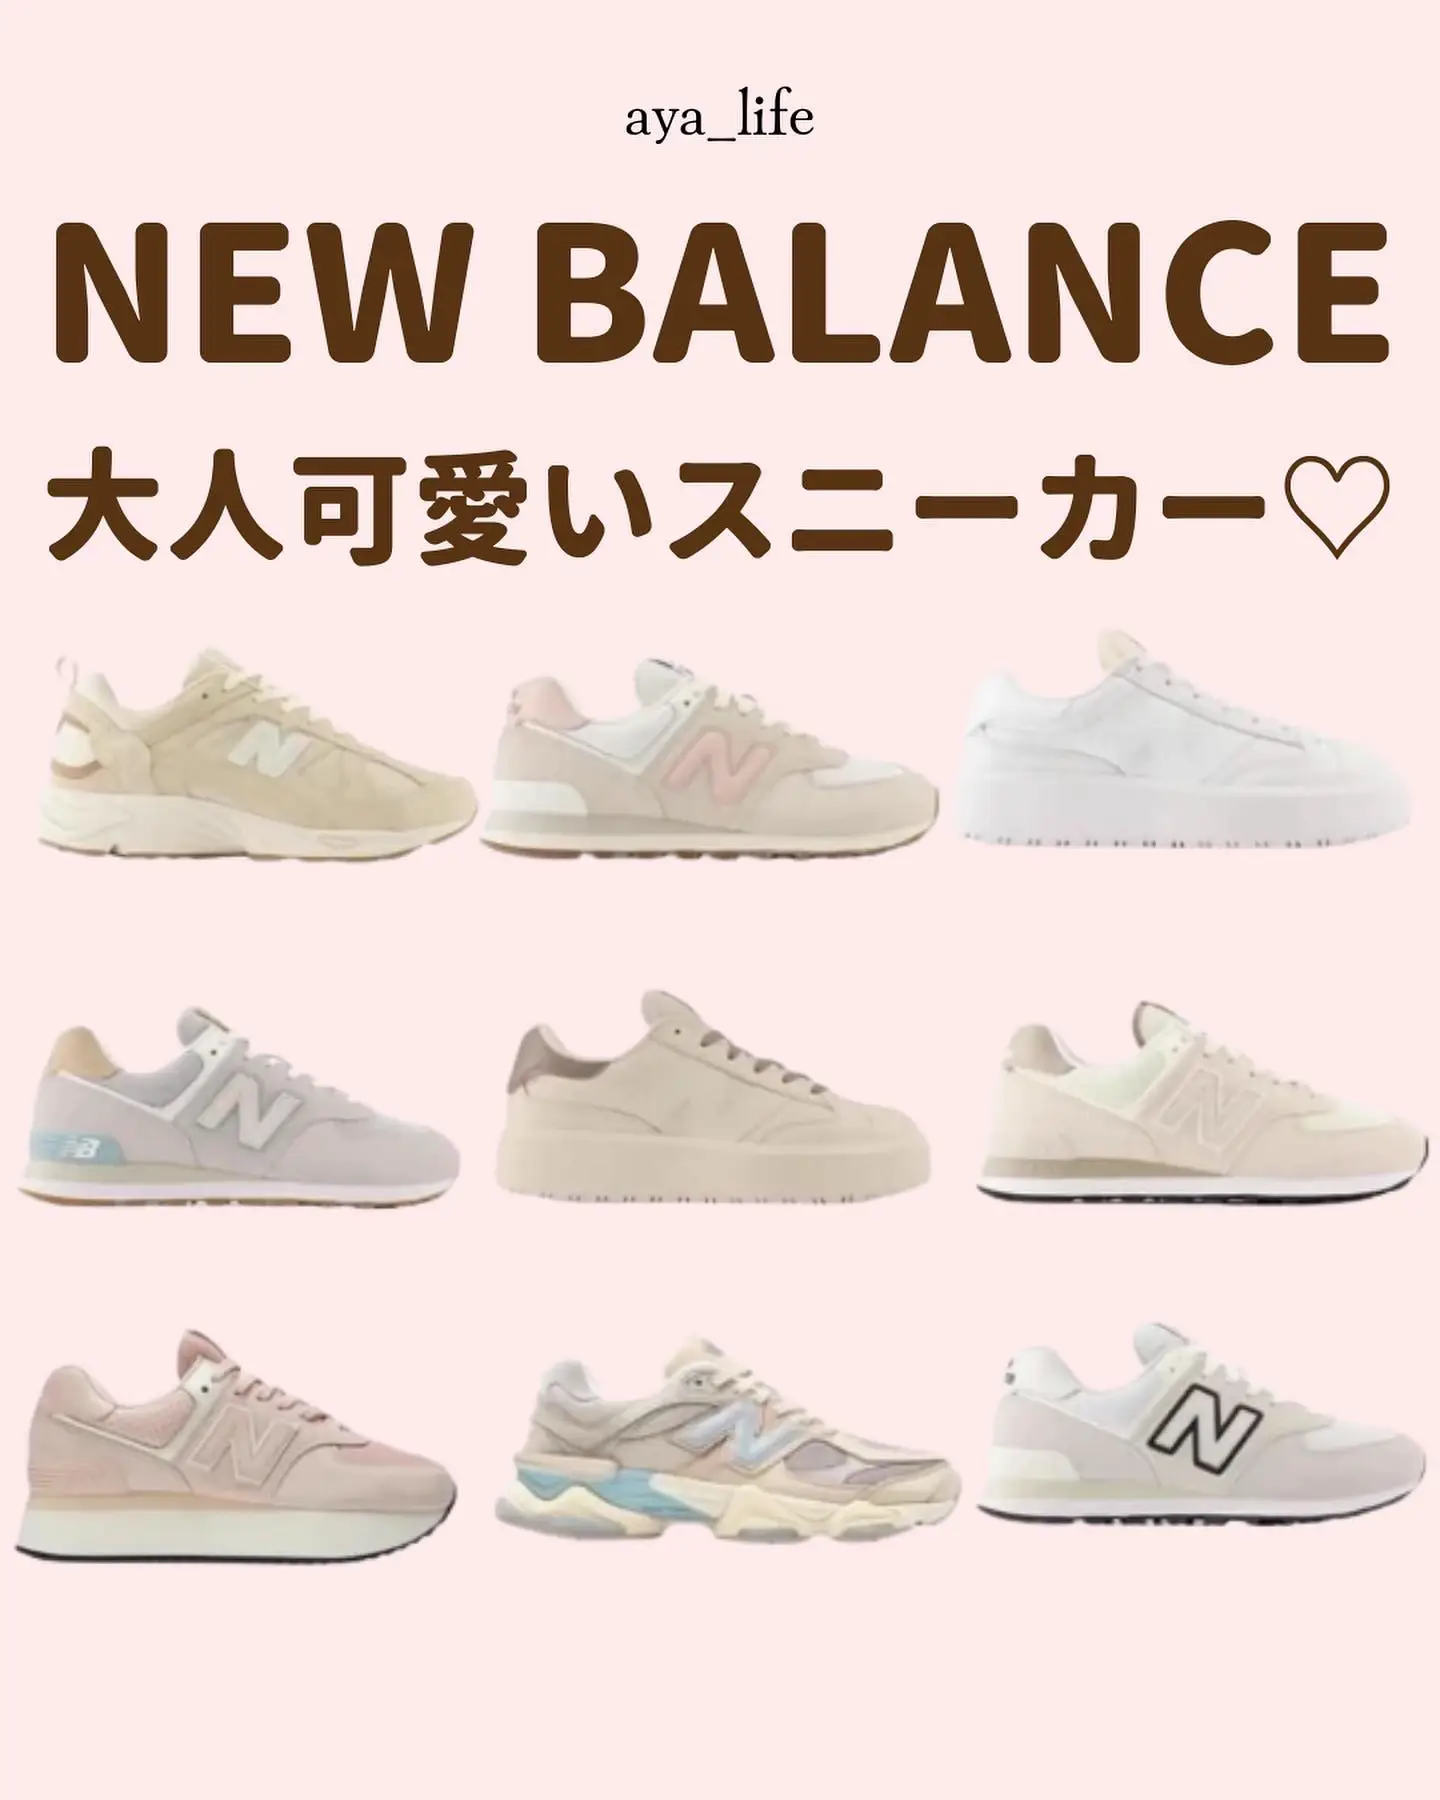 NEW BALANCE 】 Adult cute sneakers👟💗 | Gallery posted by aya